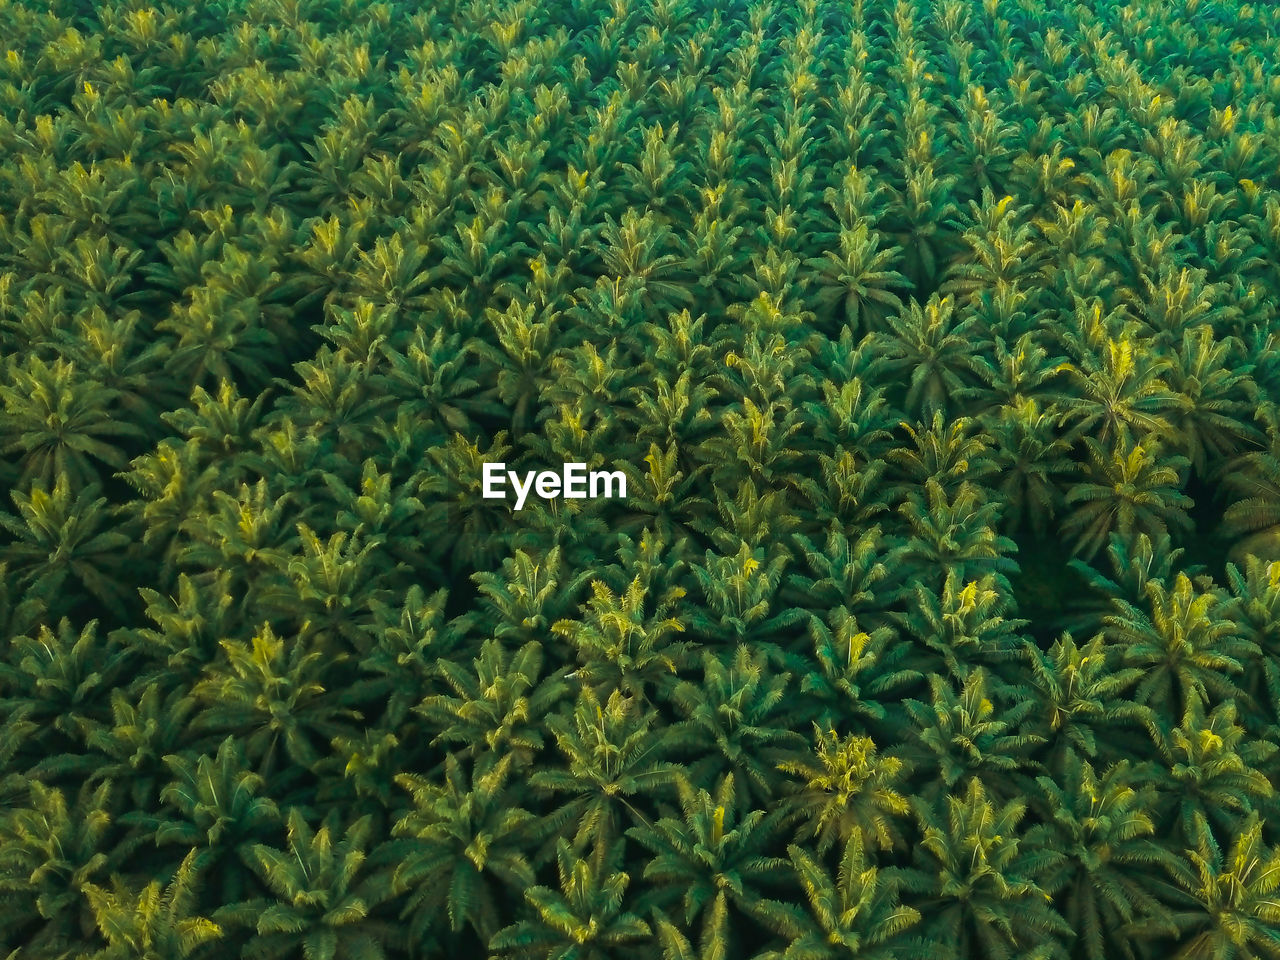 Aerial drone view of oil palm plantations in melaka, malaysia.